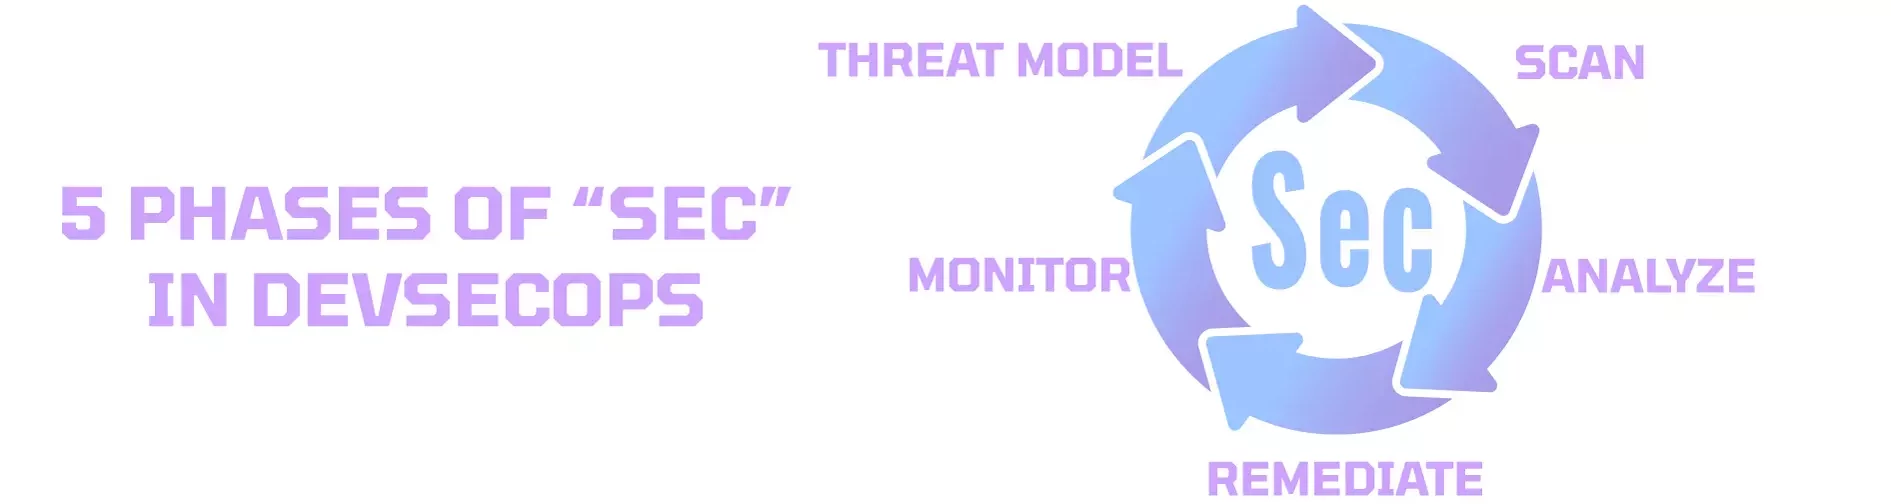 5 phases of DevSecOps